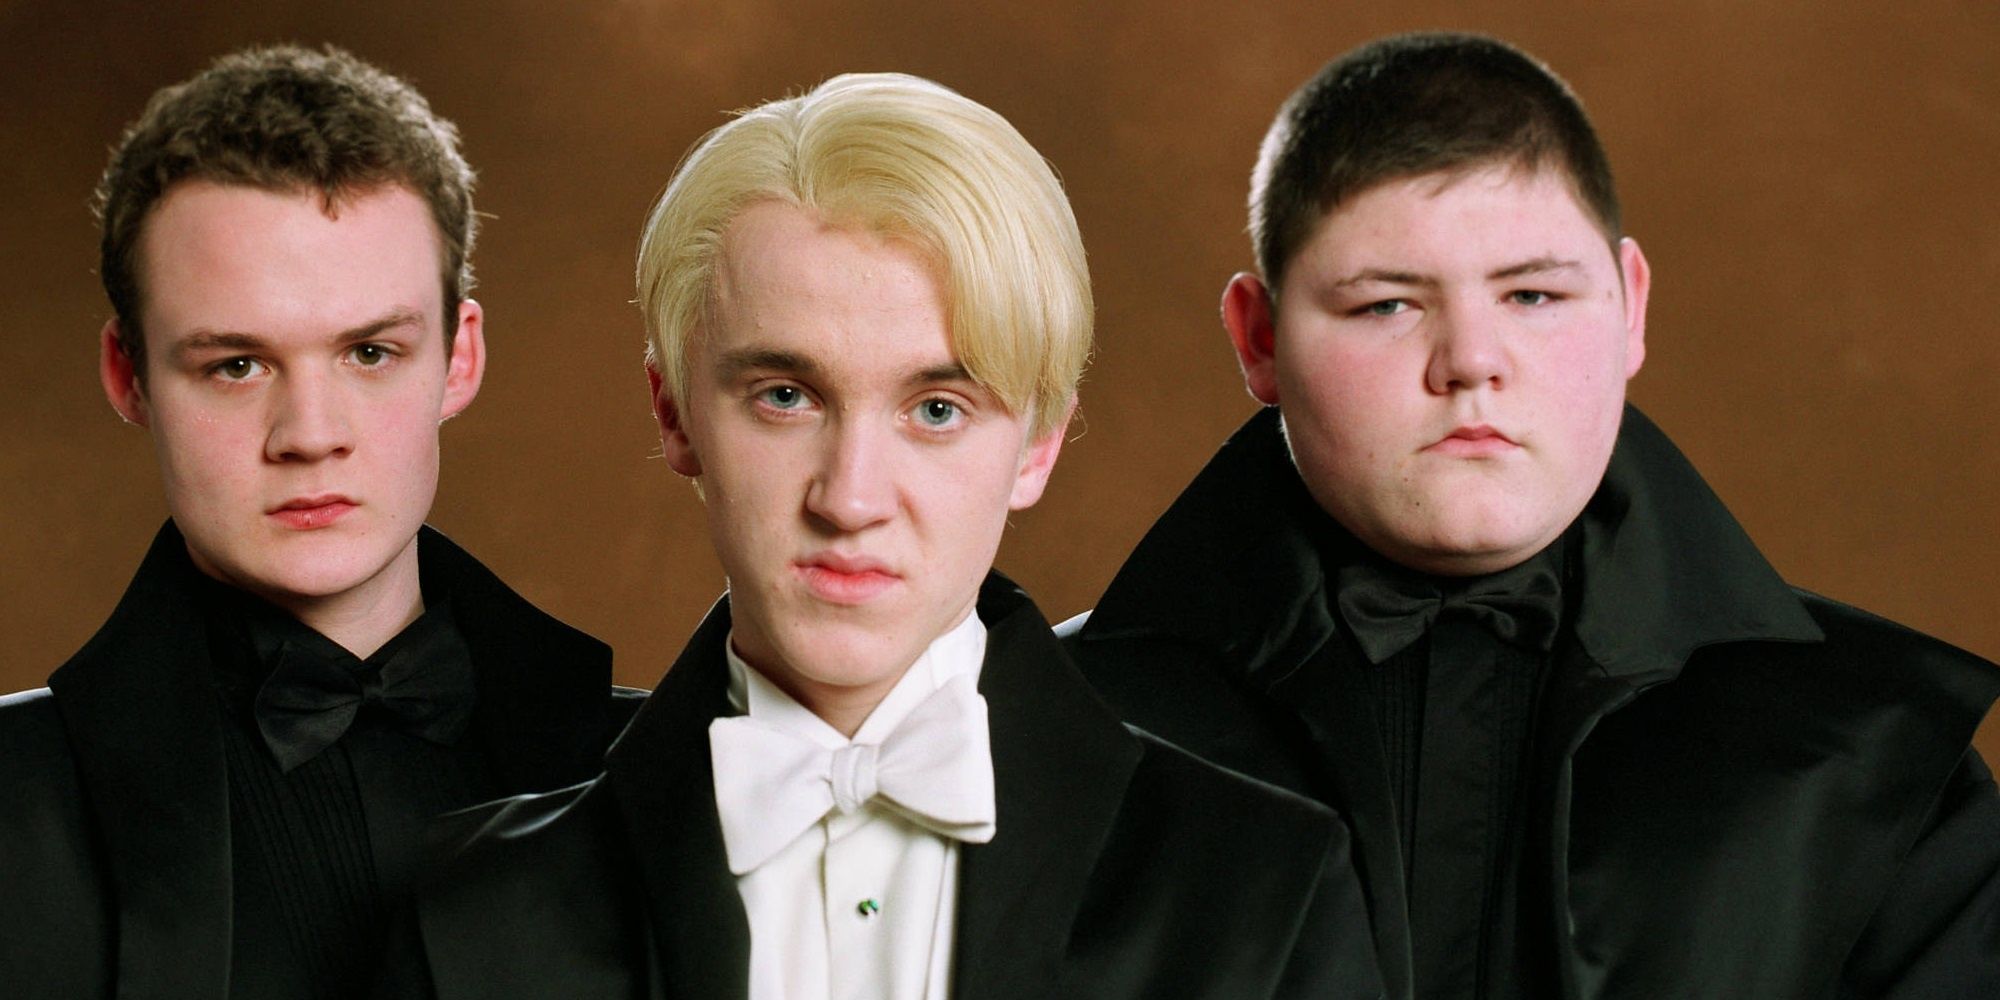 Draco Malfoy with Crabbe and Goyle in Harry Potter